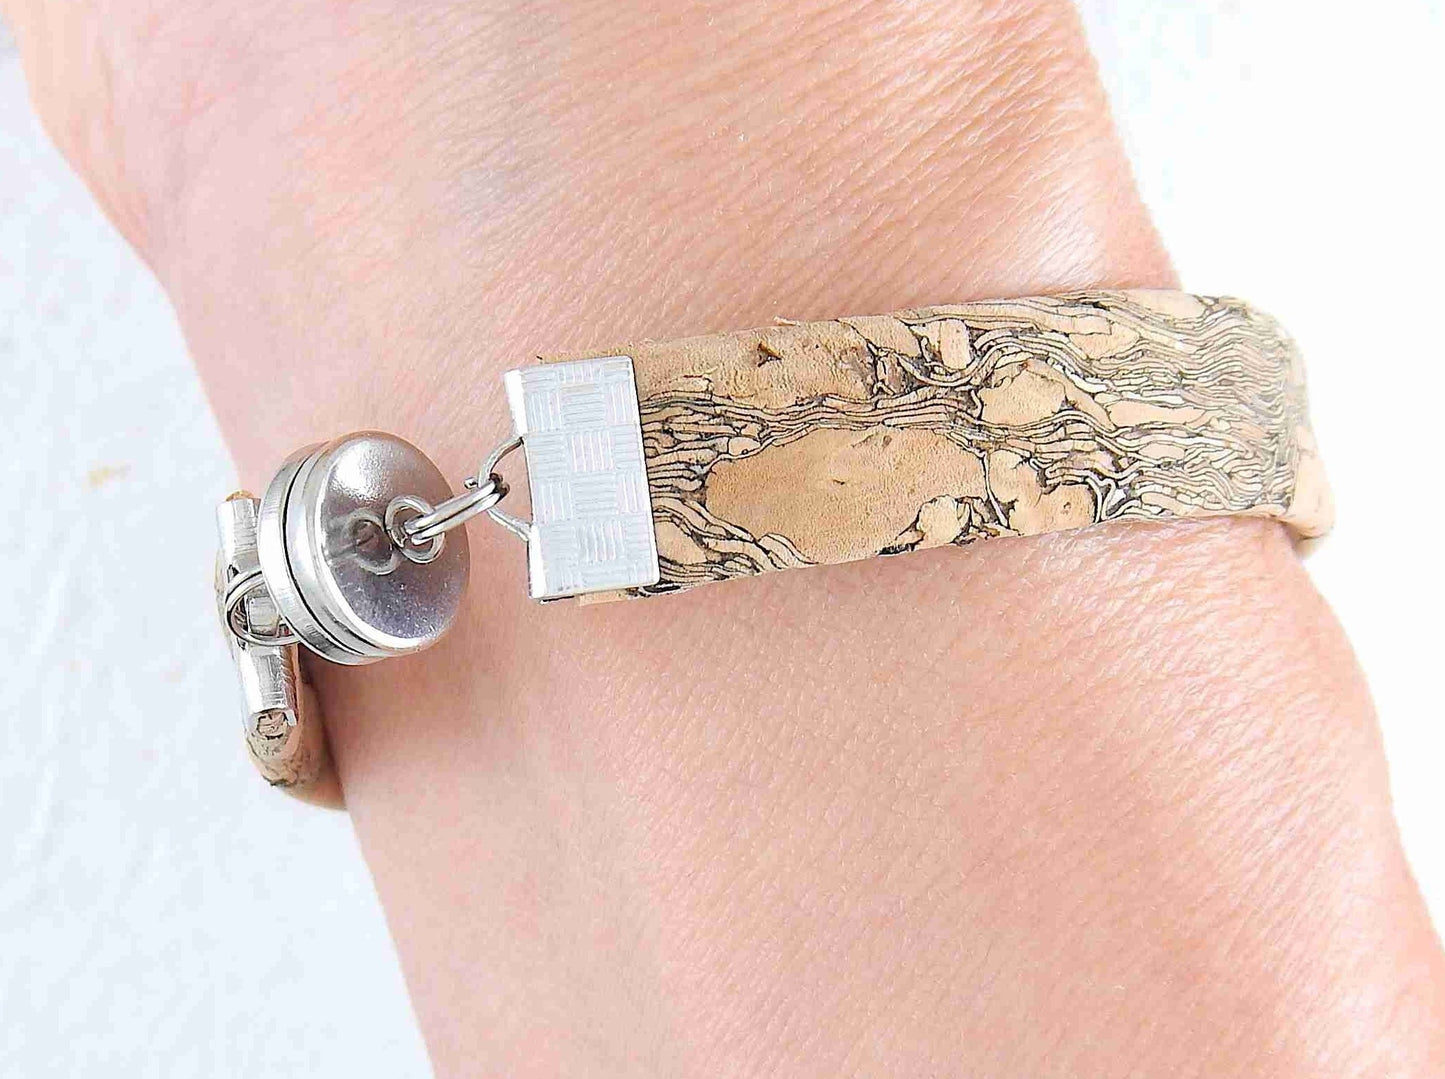 Simple 10 mm flat cork bracelet with magnetic stainless steel clasp in 2 patterns (coloured tiles on beige background, marbled gray-beige)